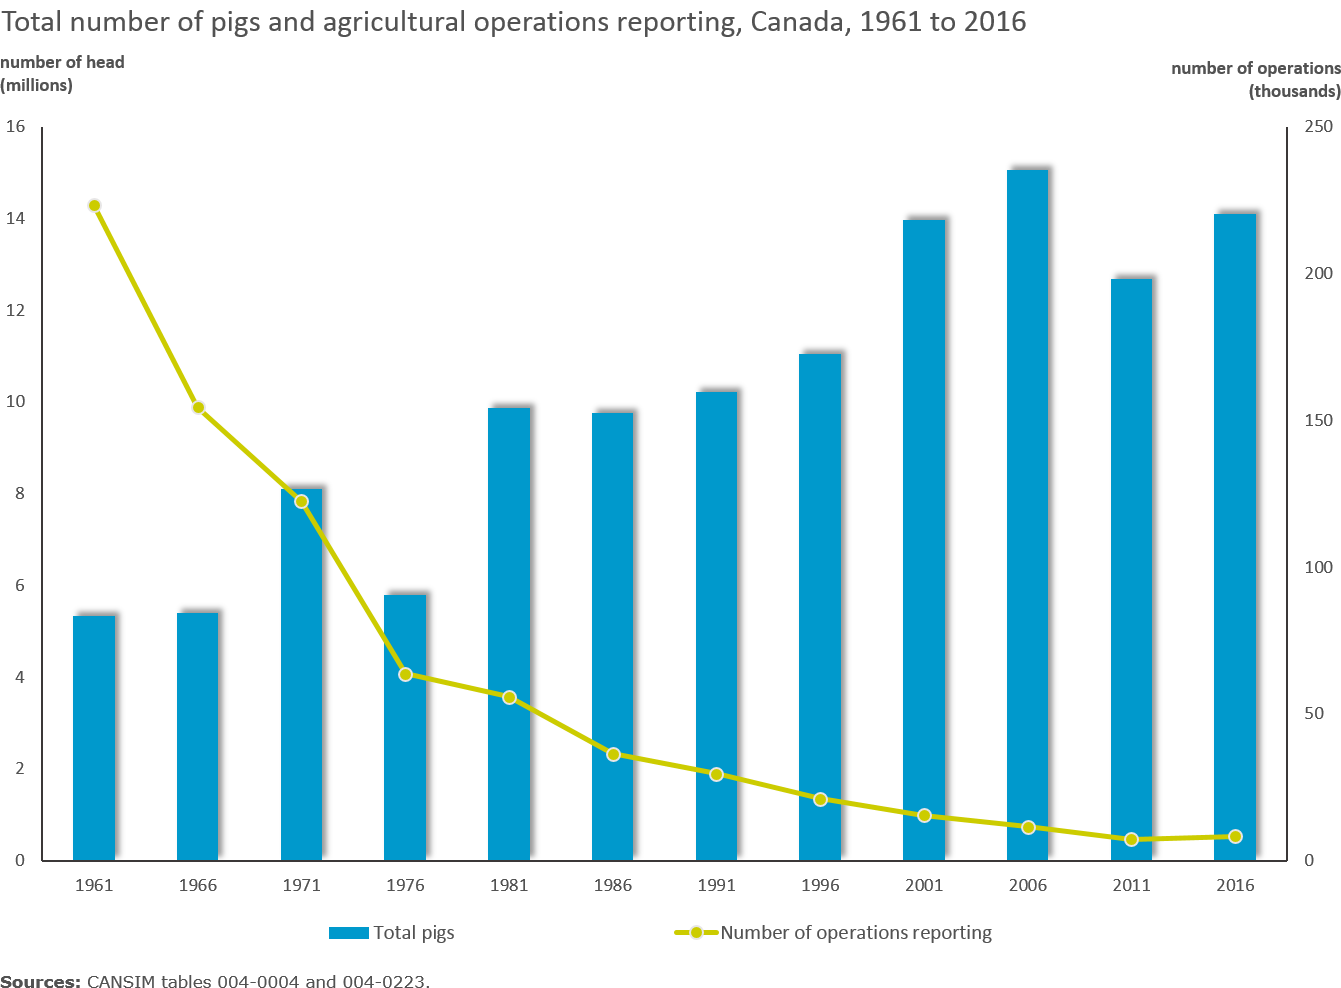 Chart 16 - Total number of pigs and agricultural operations reporting, Canada, 1961 to 2016